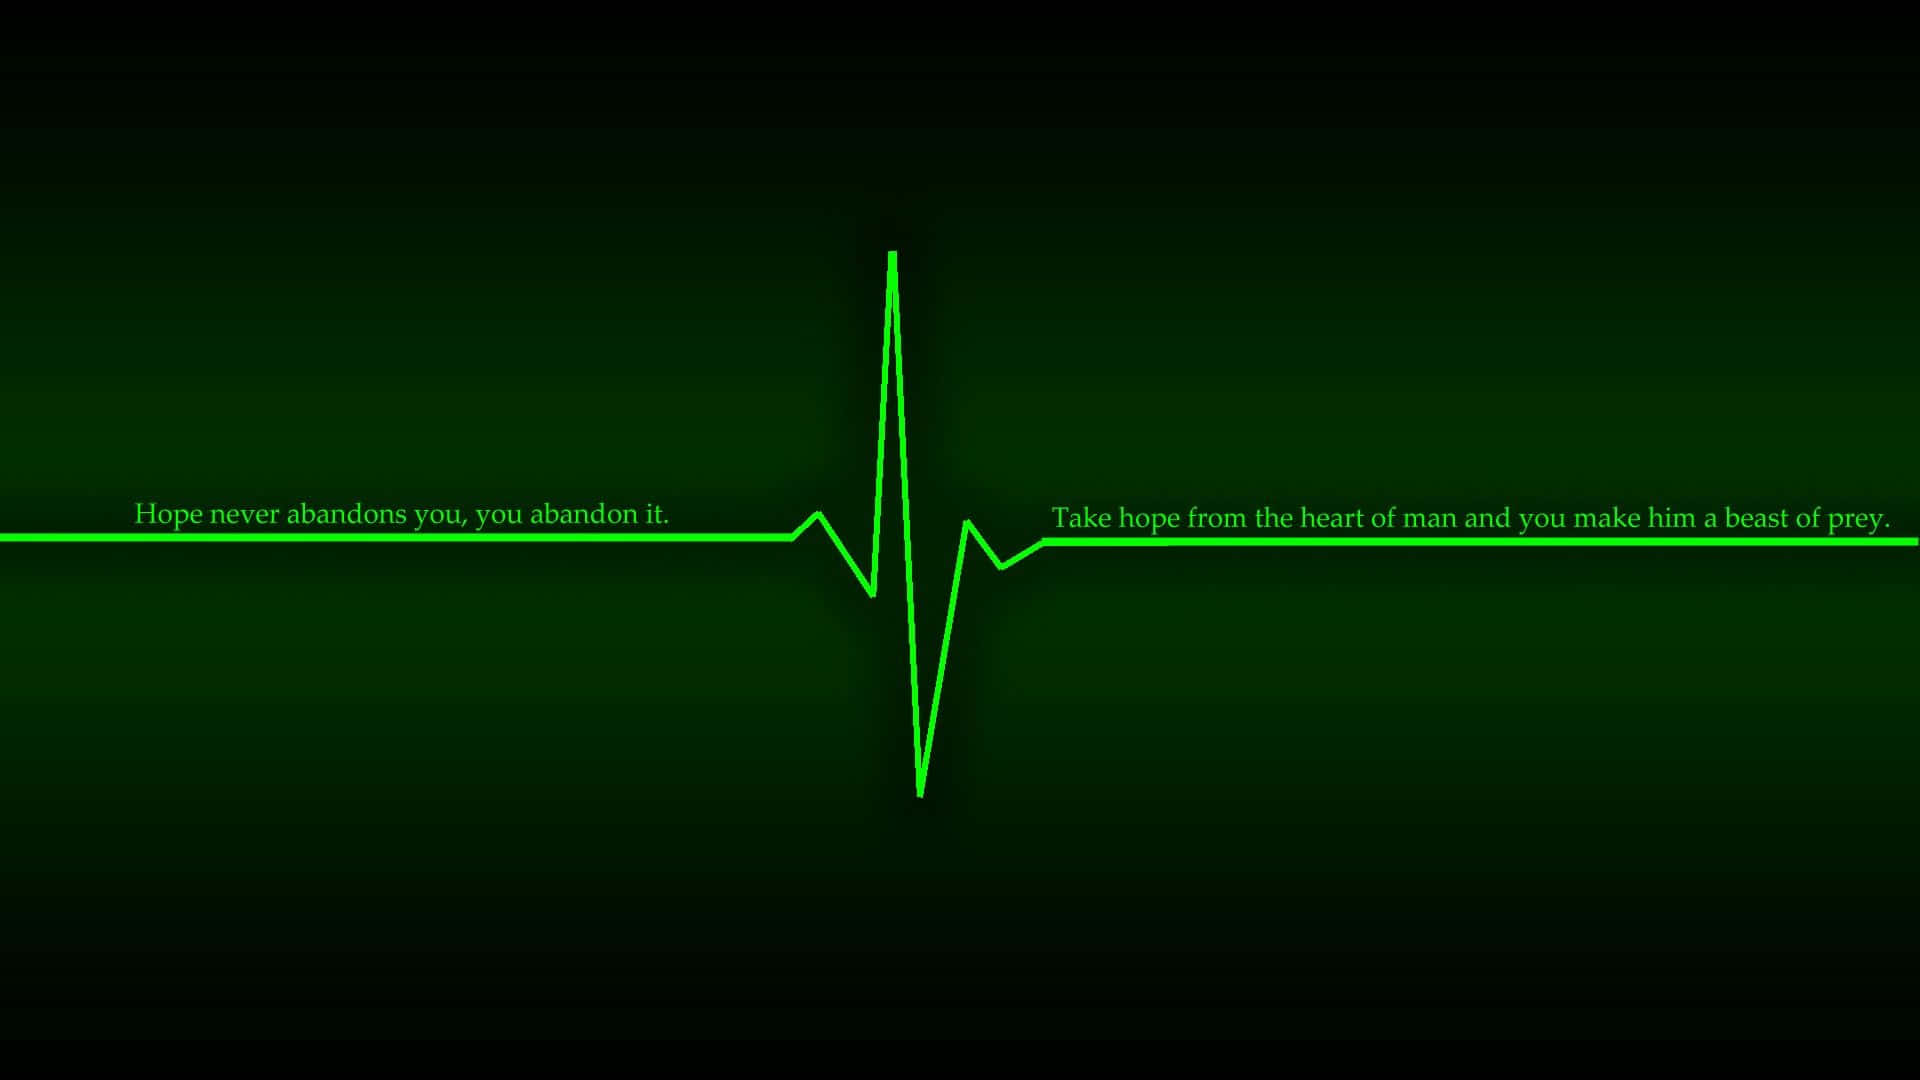 Captivating Rhythm of Life: A Heart Rate Diagram Wallpaper